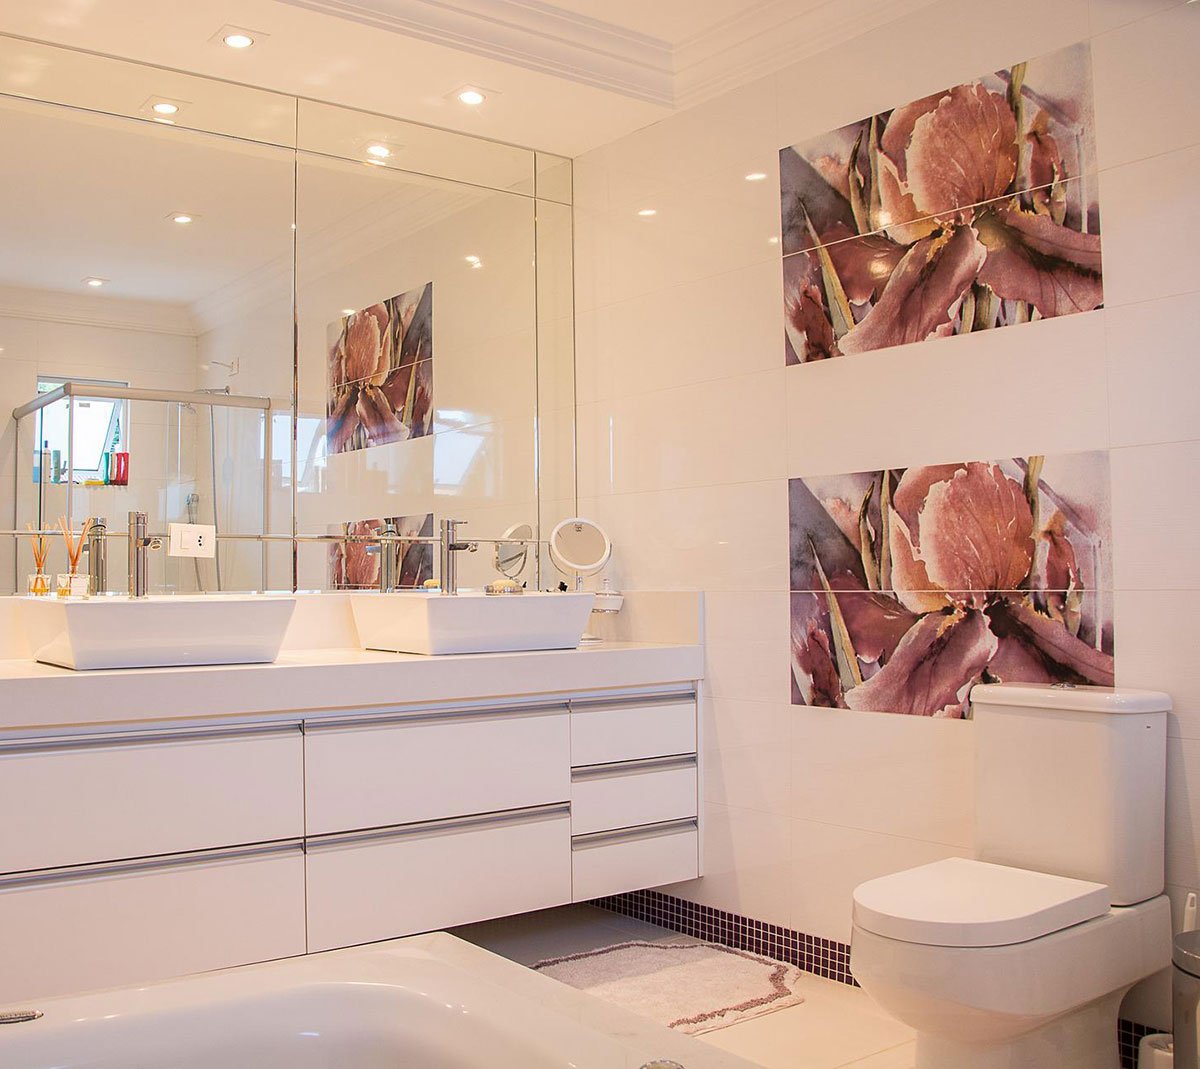 Choose from Our Top Luxury Bathroom Designs